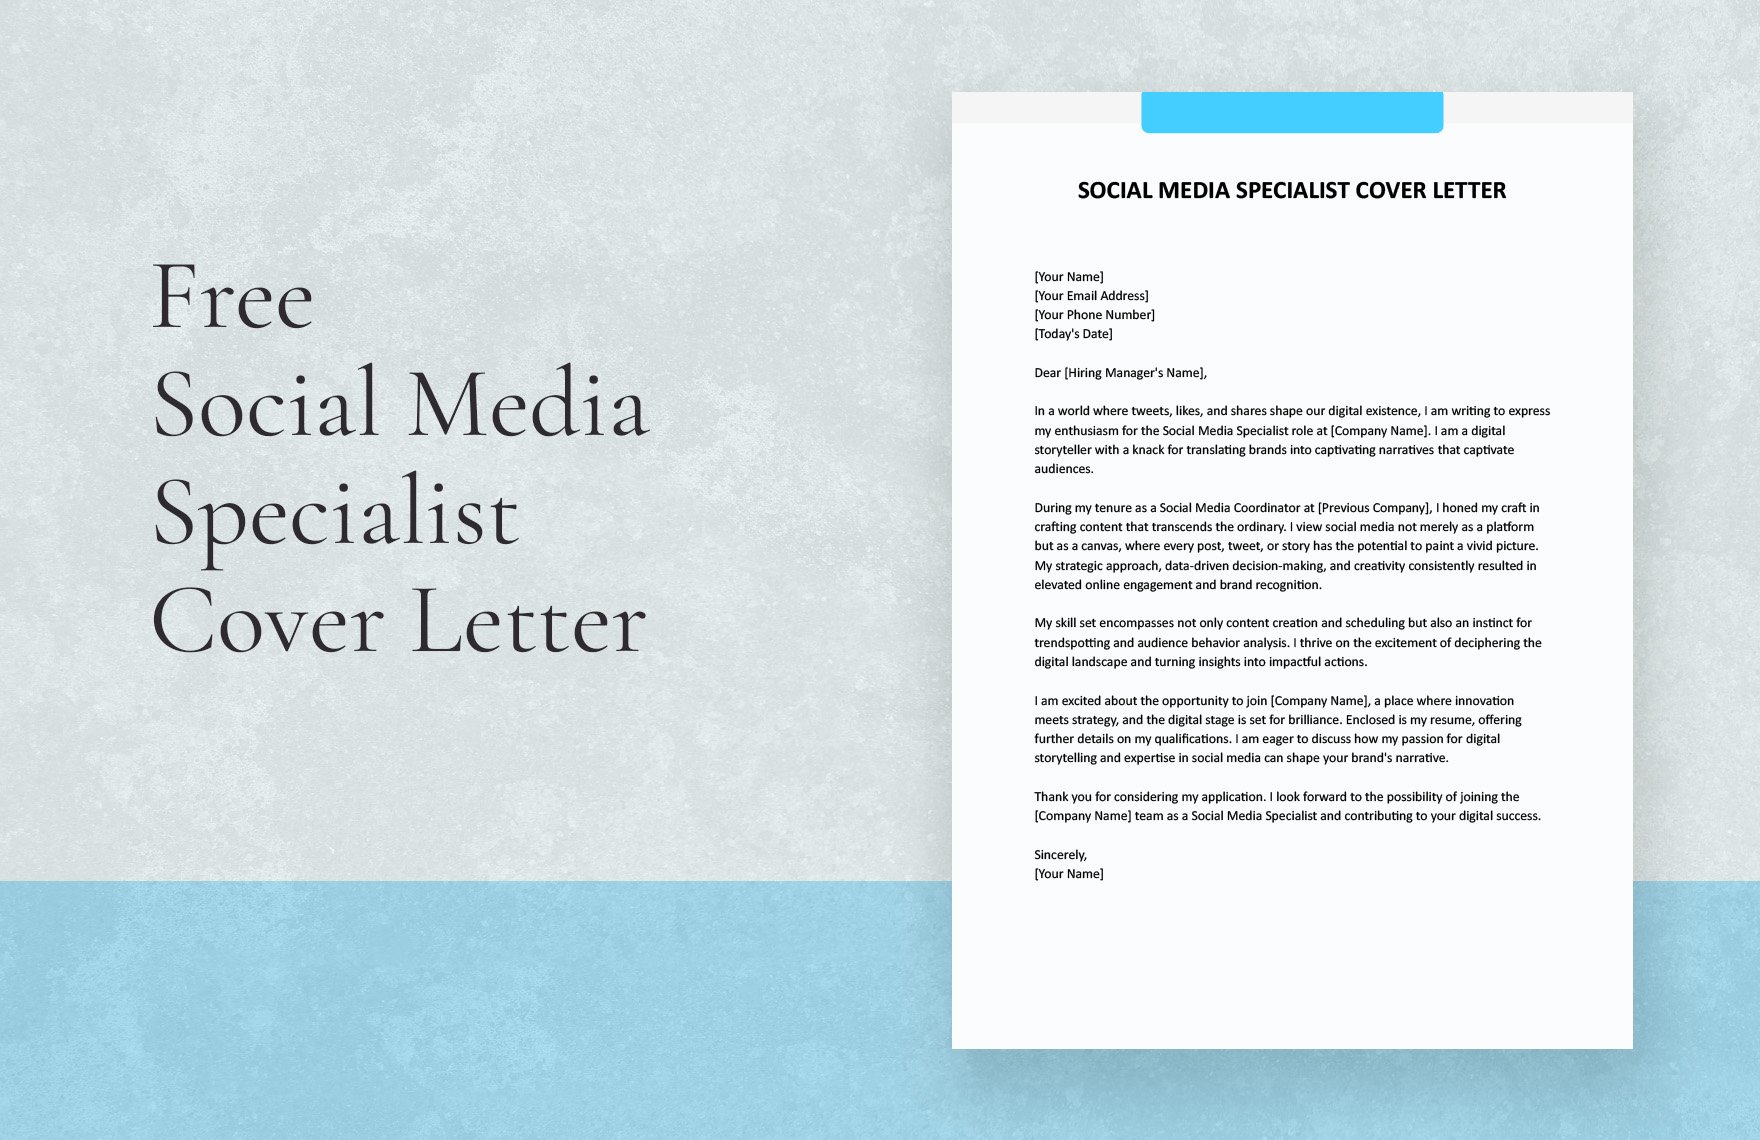 Social Media Specialist Cover Letter in Word, Google Docs